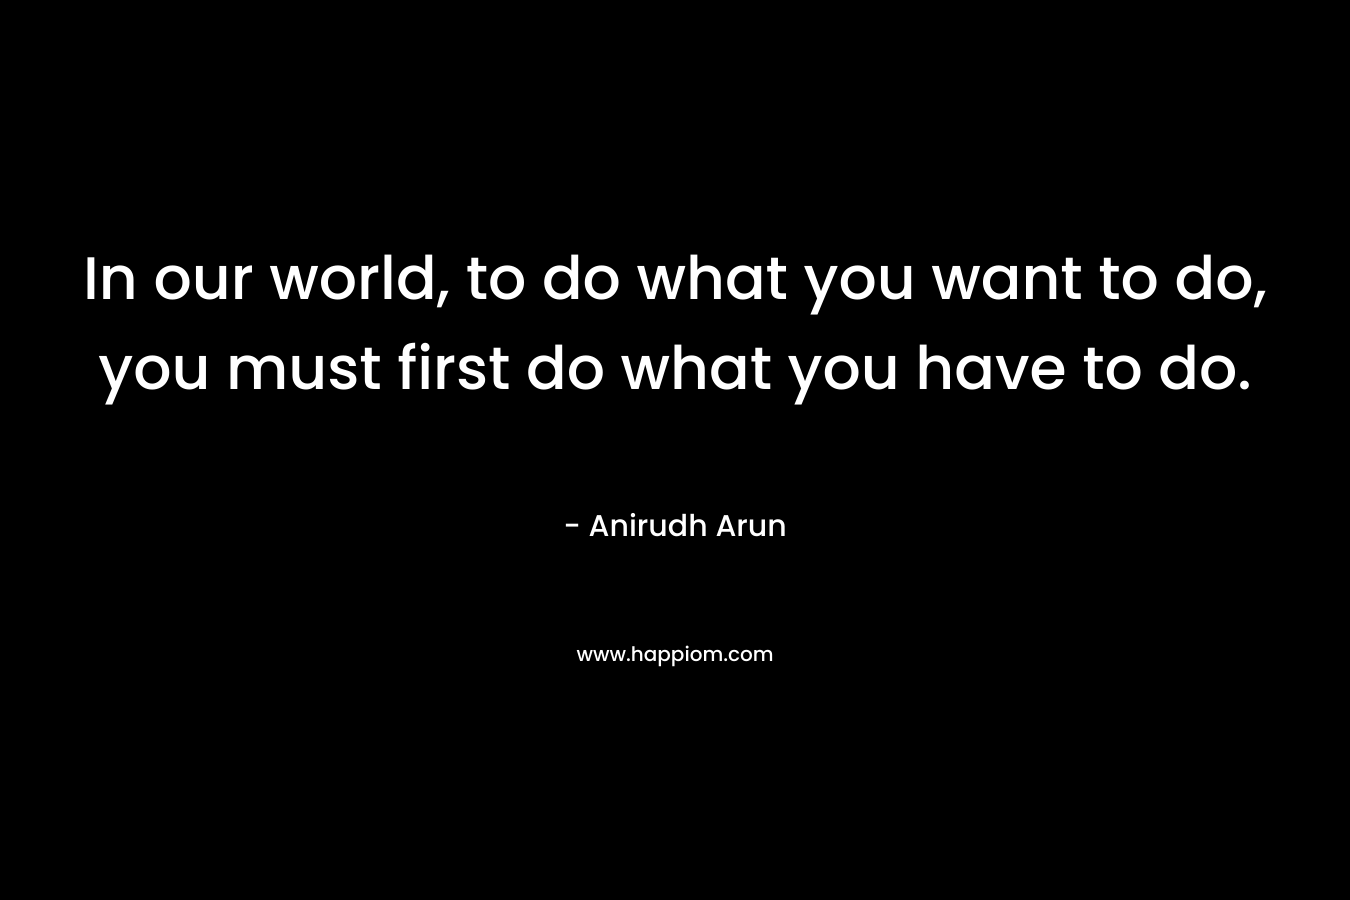 In our world, to do what you want to do, you must first do what you have to do.